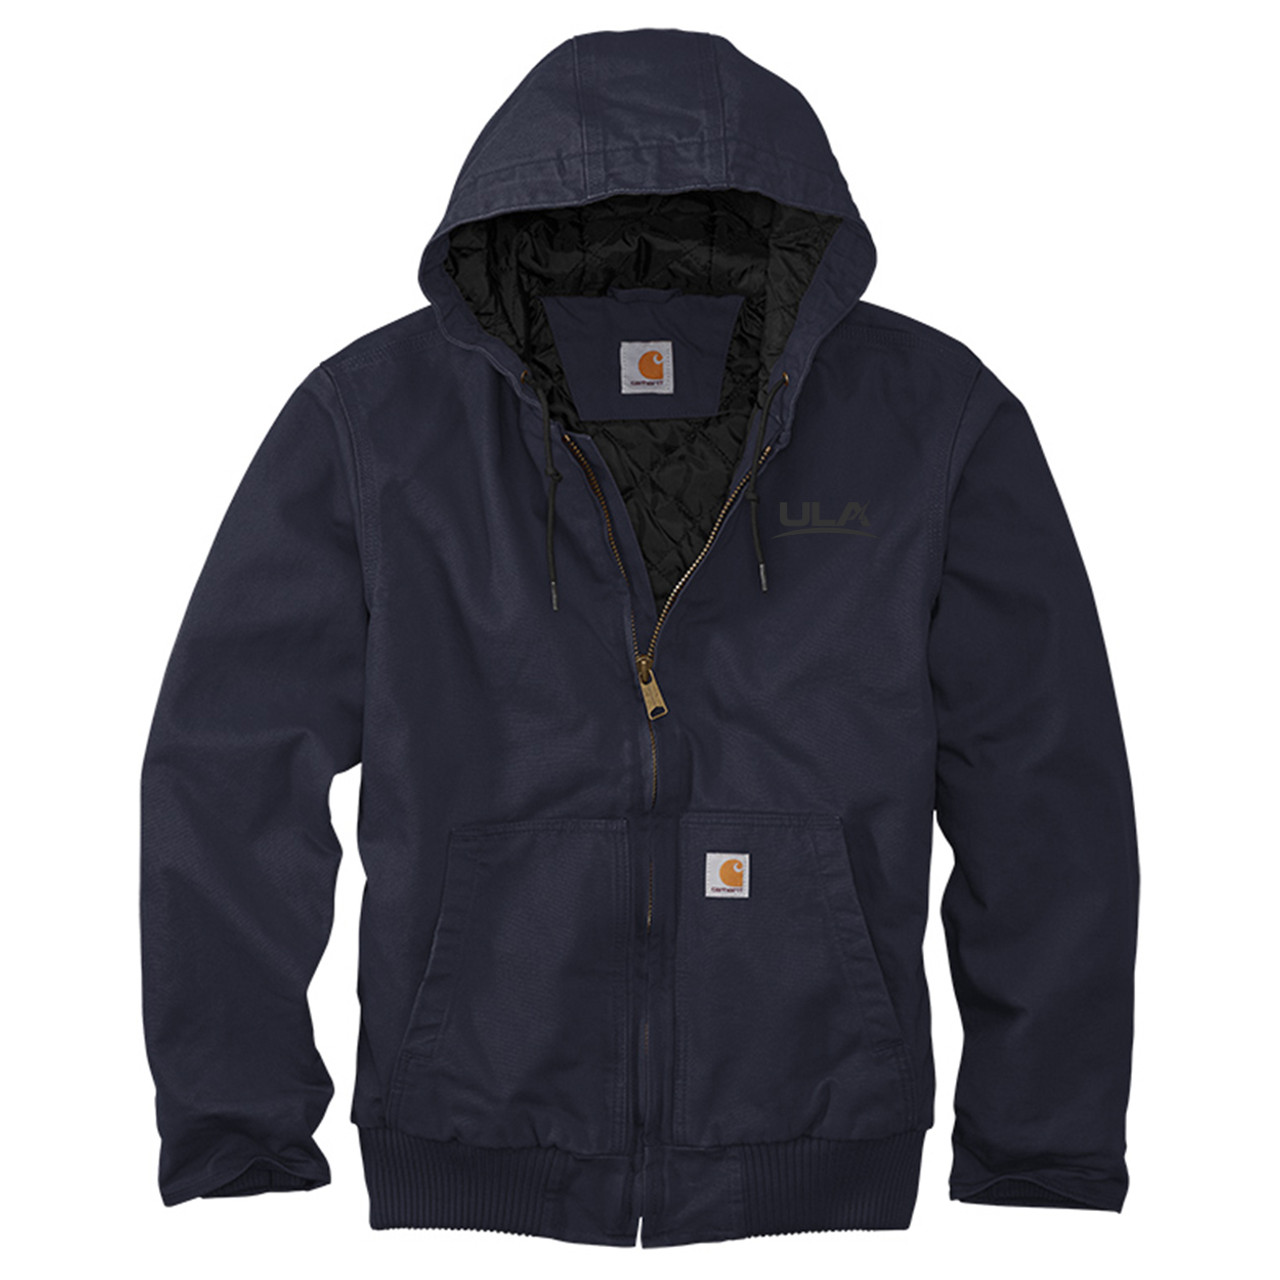 Men's Carhartt Washed Duck Jacket - United Launch Alliance